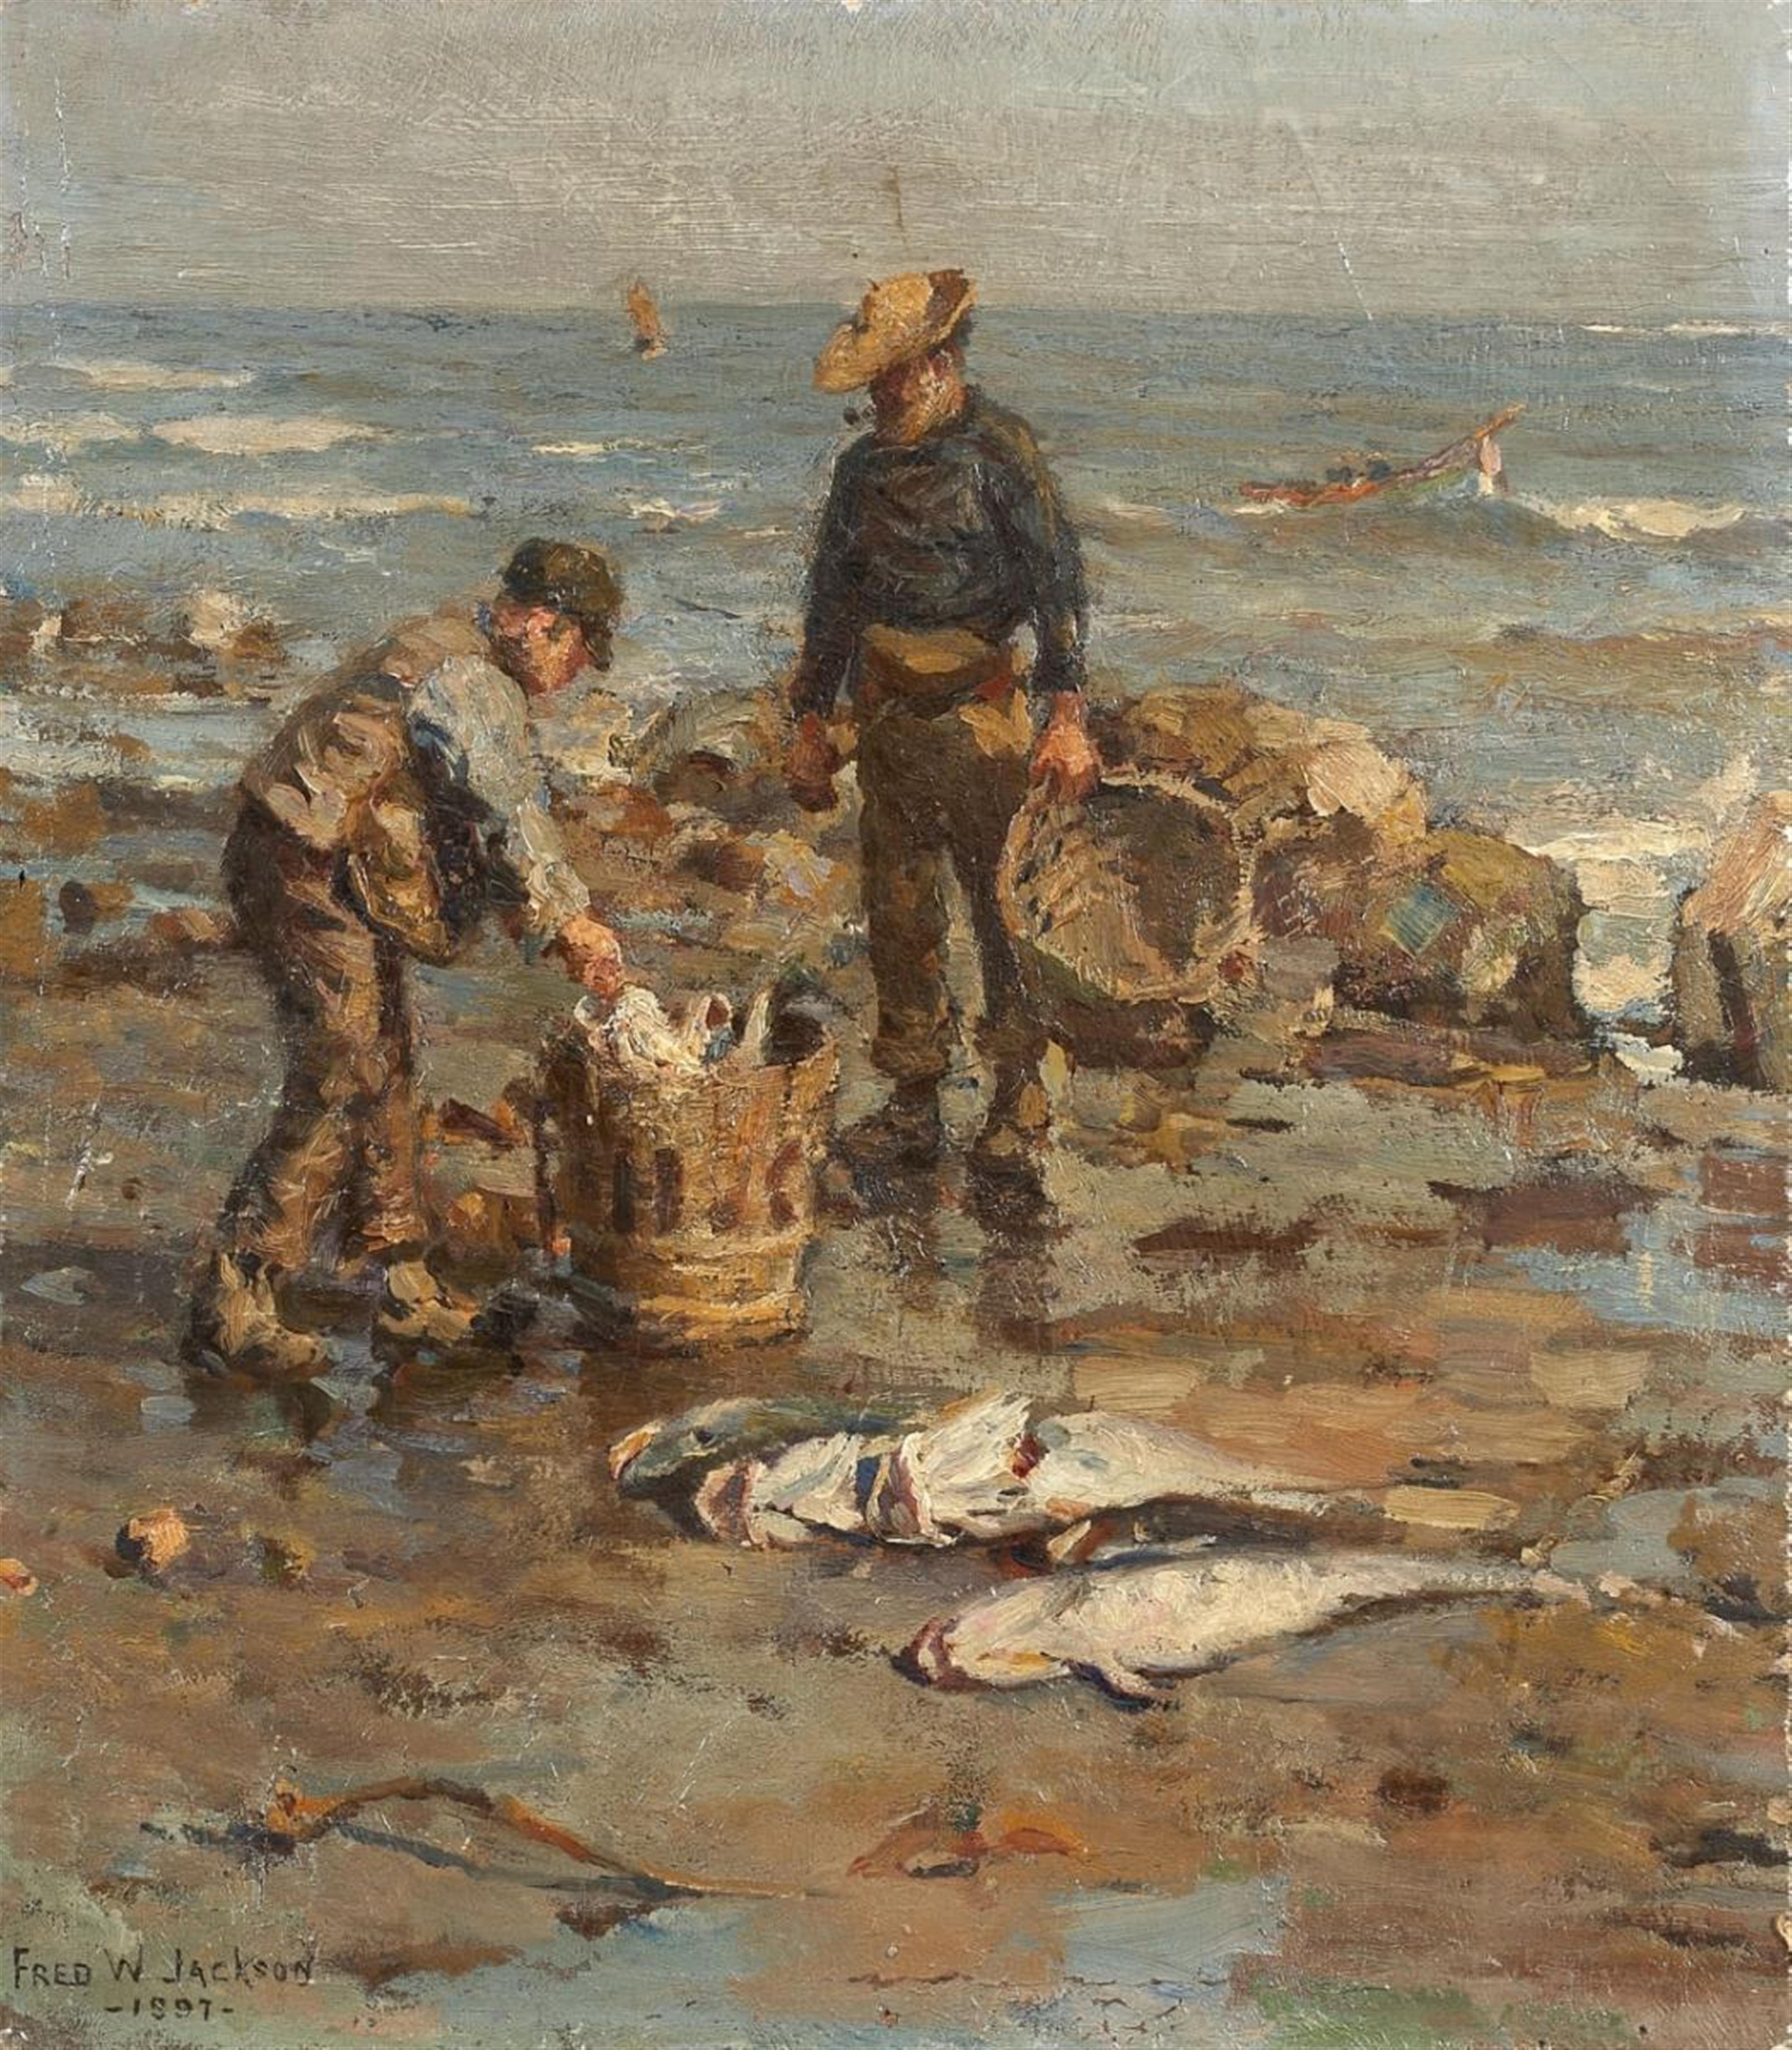 Frederick William Jackson - SCENE AT THE SHORE WITH TWO FISHERMEN - image-1